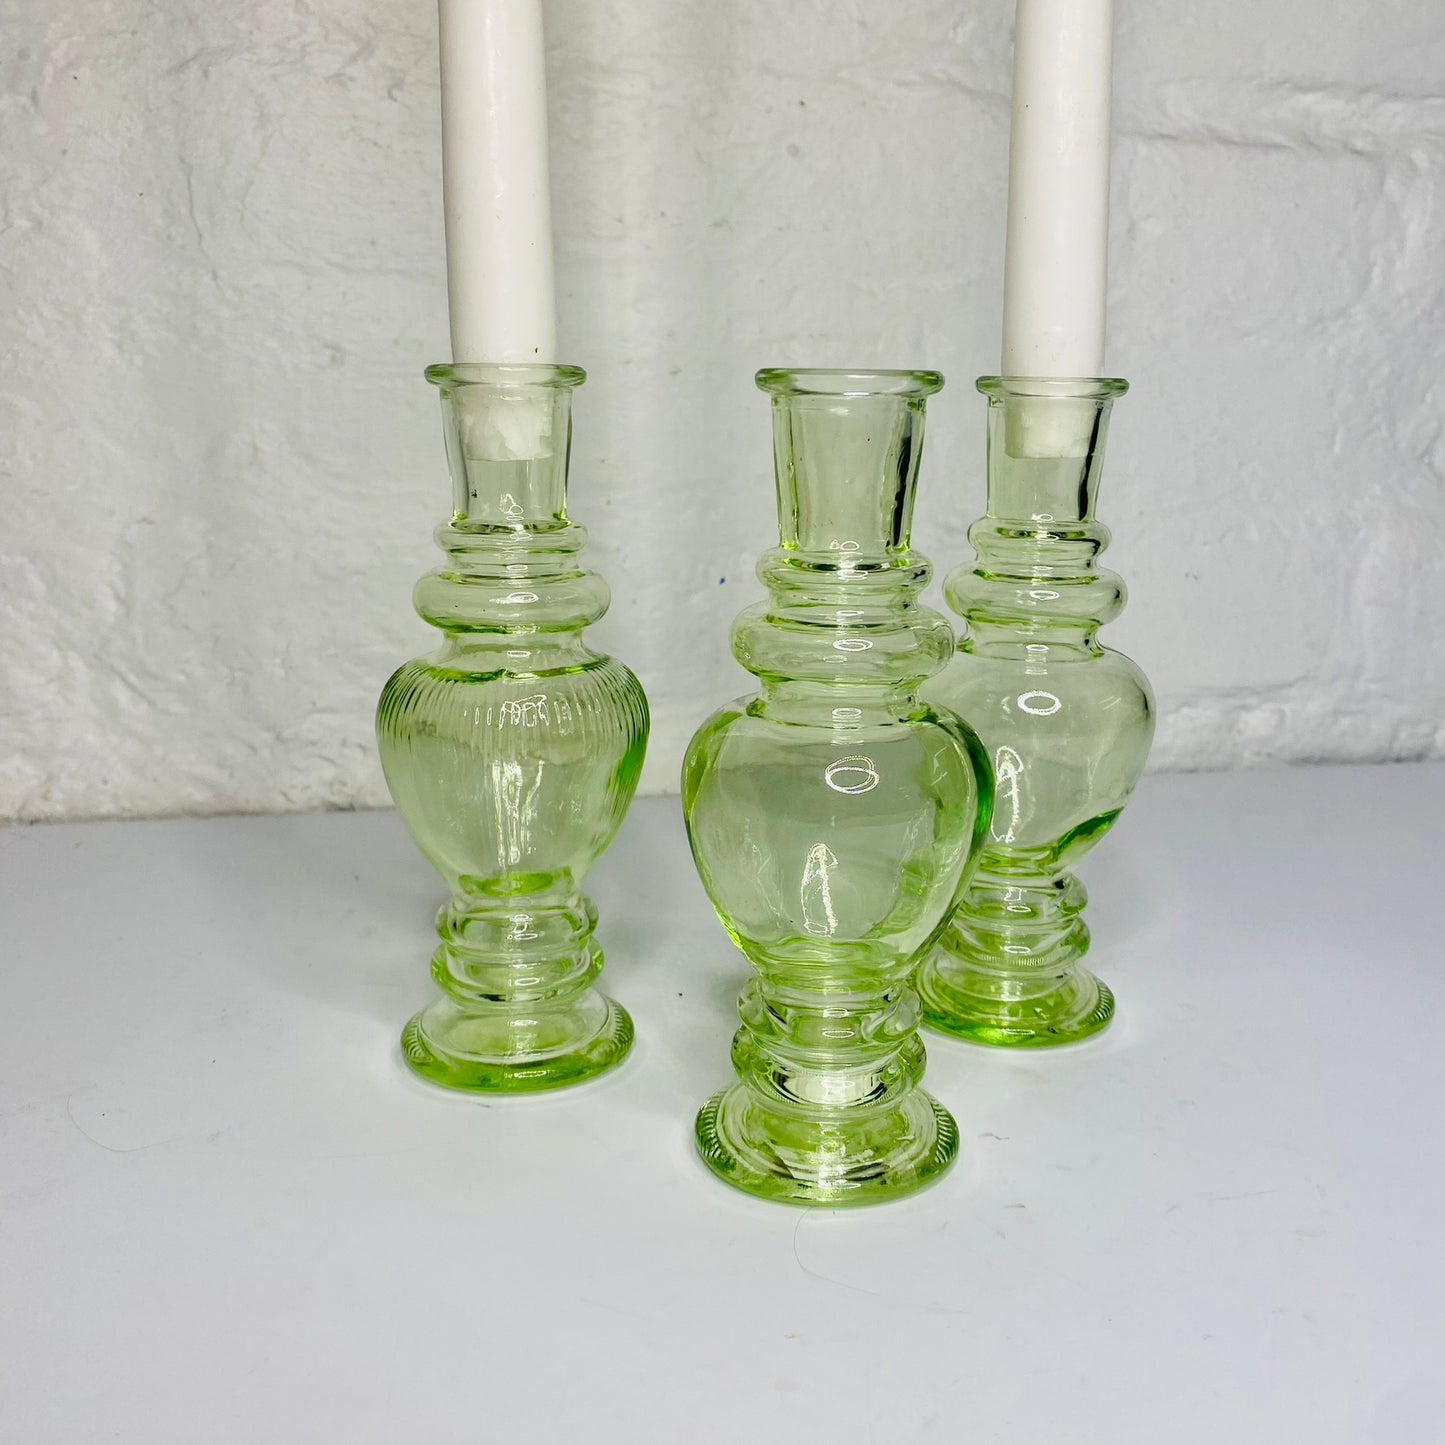 Green Glass Taper Candle Holder - A Radiant Touch of Elegance